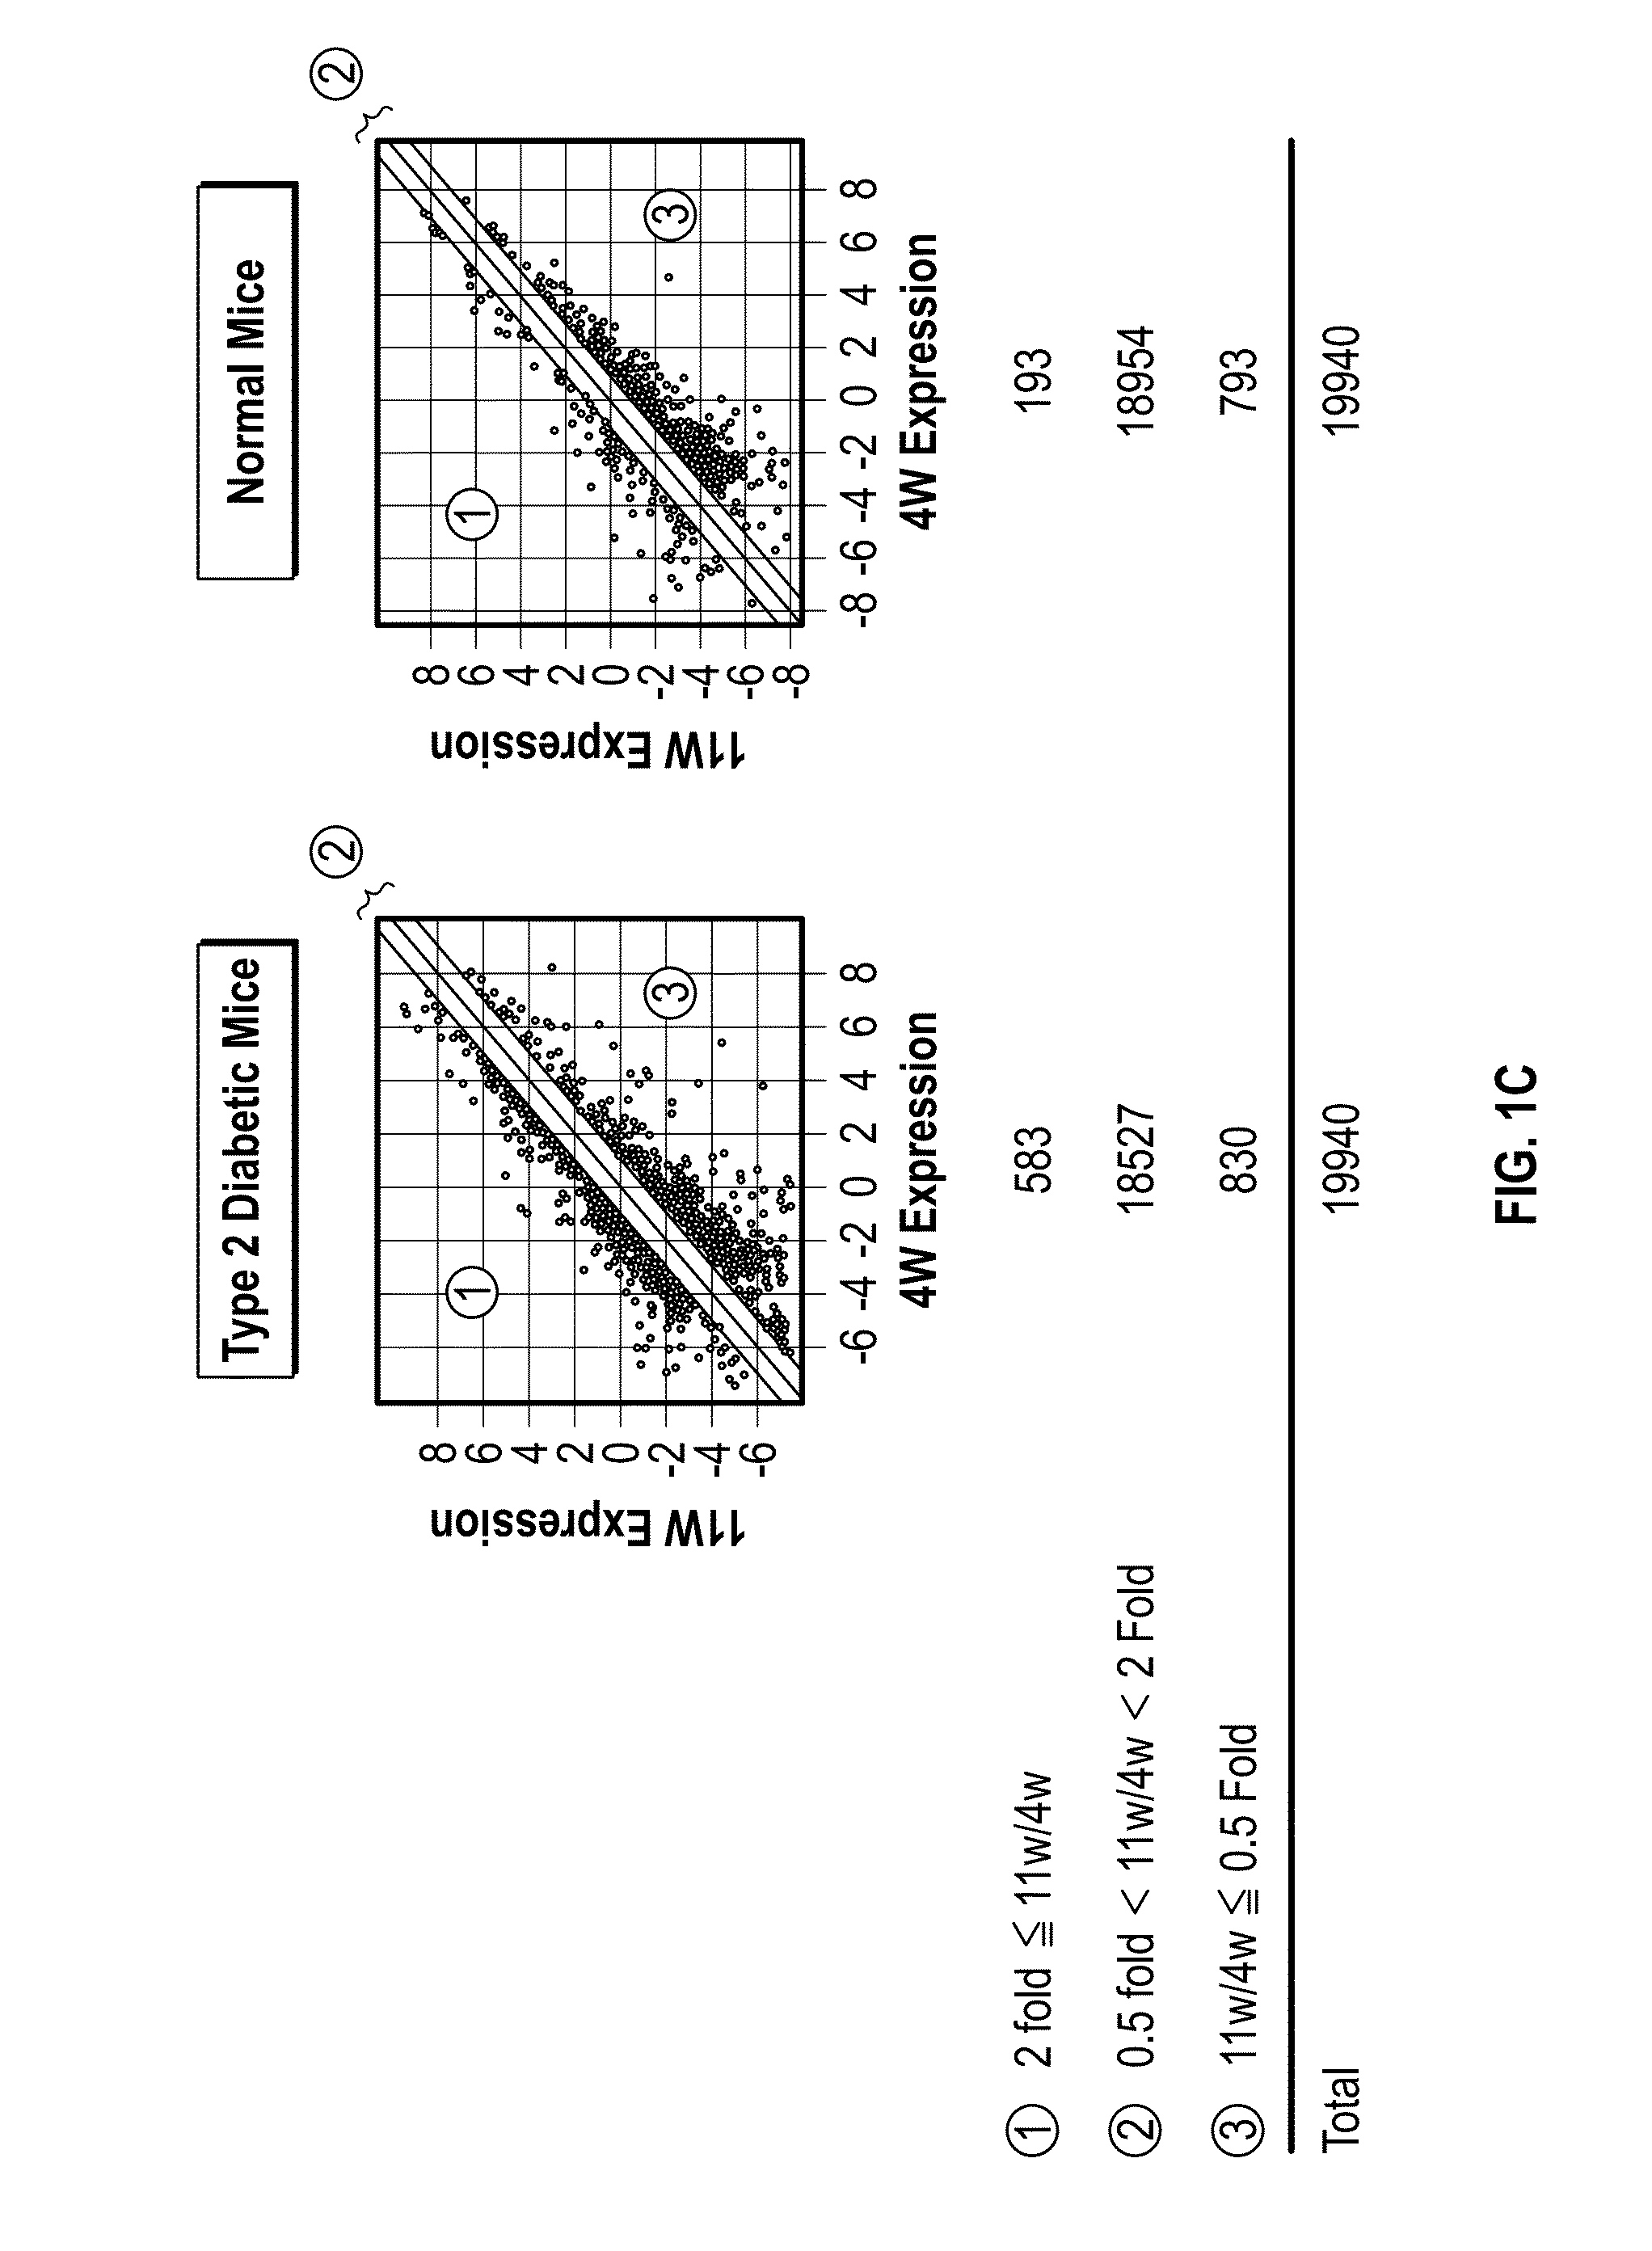 Method for treating and preventing type 2 diabetes